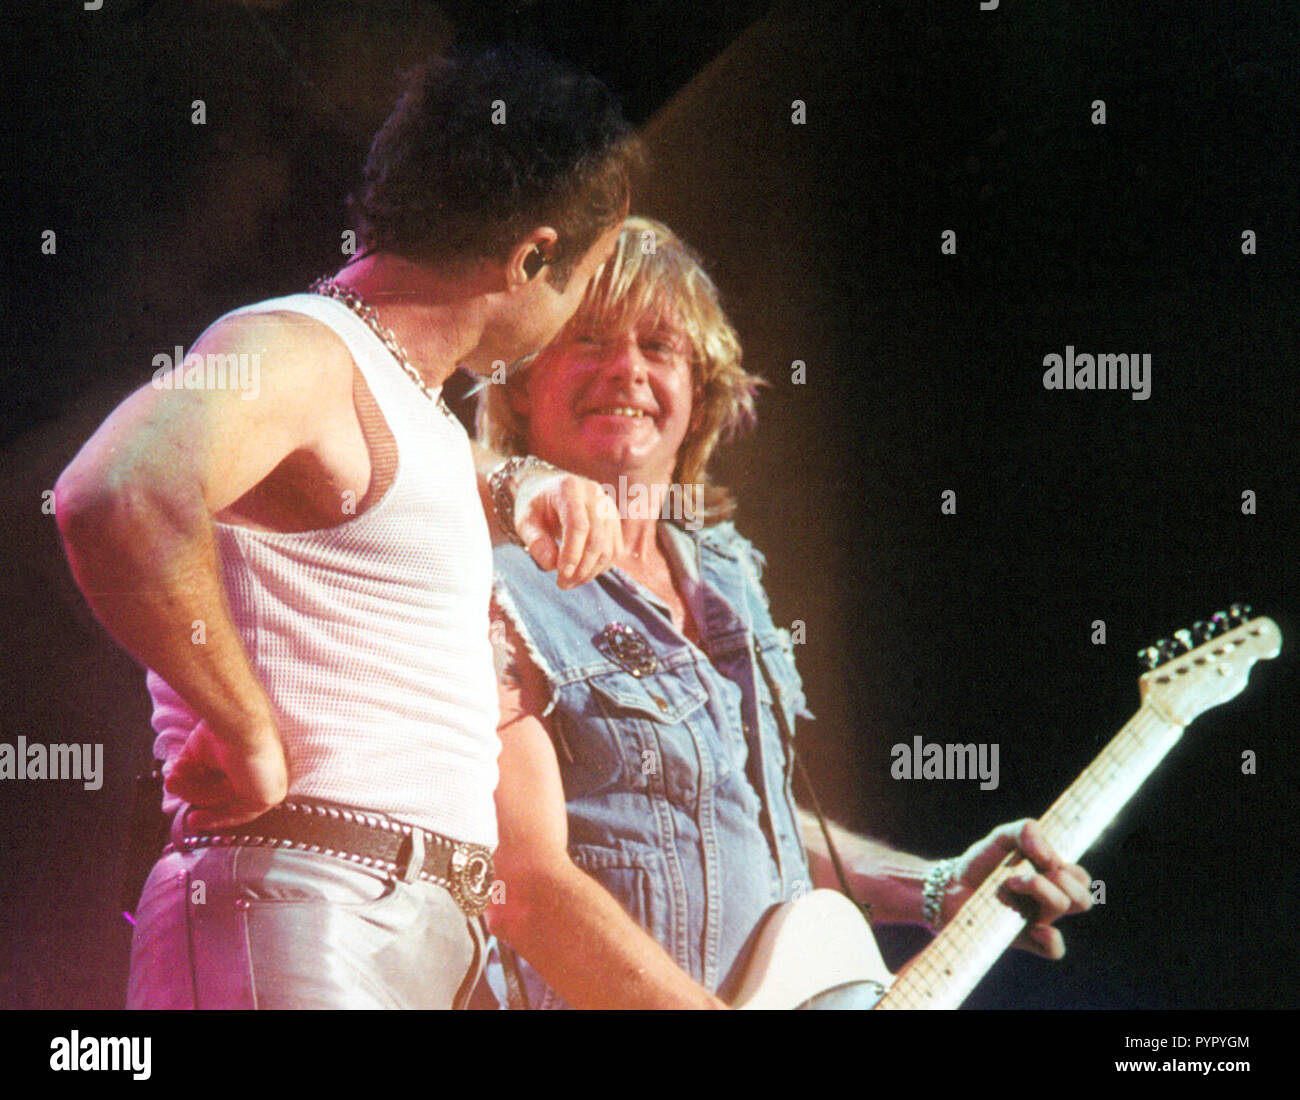 JUNE 21: Paul Rodgers and Dave 'Bucket' Colwell of Bad Company perform at Lakewood Amphitheatre in Atlanta on June 21, 2001. CREDIT: Chris McKay / MediaPunch Stock Photo